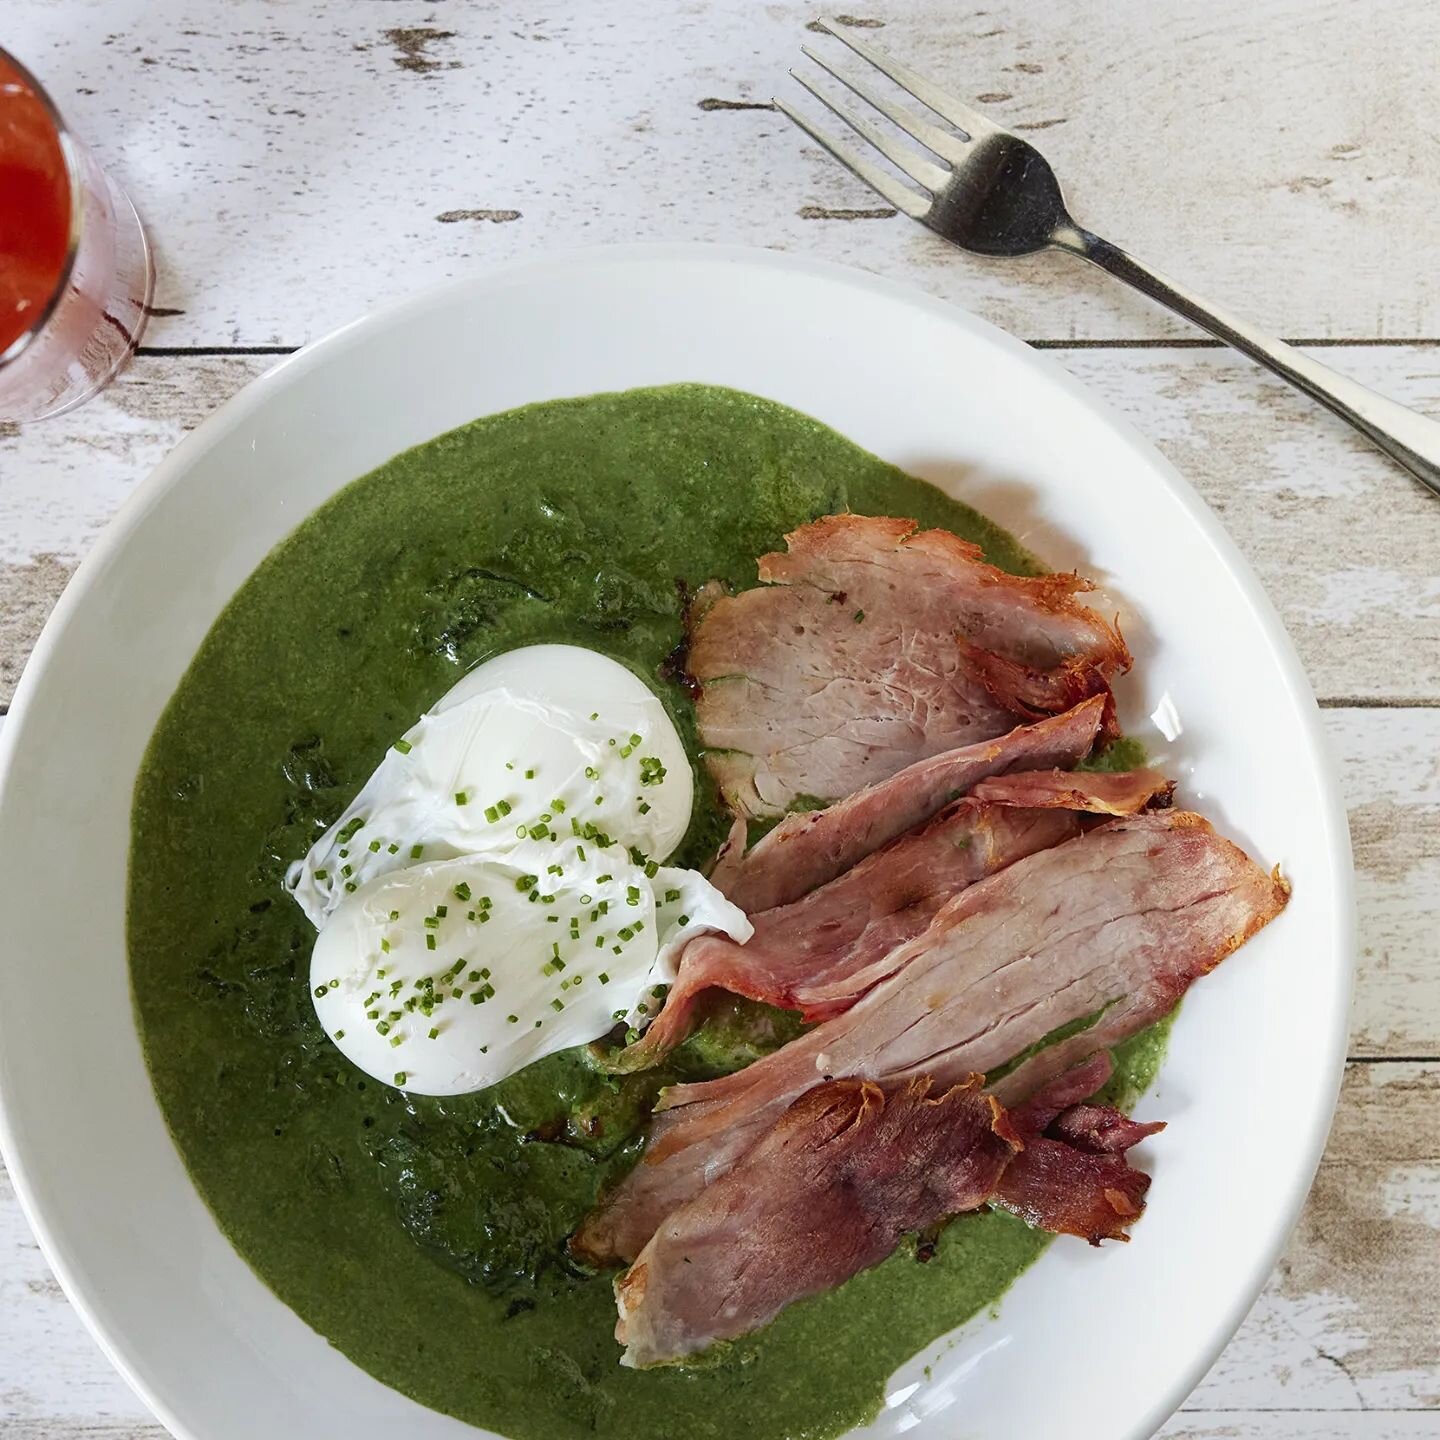 {P&acirc;ques}

An Easter fan favorite: Country Ham and Creamed Spinach (with a poached egg, bien s&ucirc;r!) 🥚
.
.
#leperchehudson #hudsonvalley #hudsonny #warrenstreet #daytimeeatery #frenchtwist #breakfast #brunch #lunch #restaurant #bakery #east